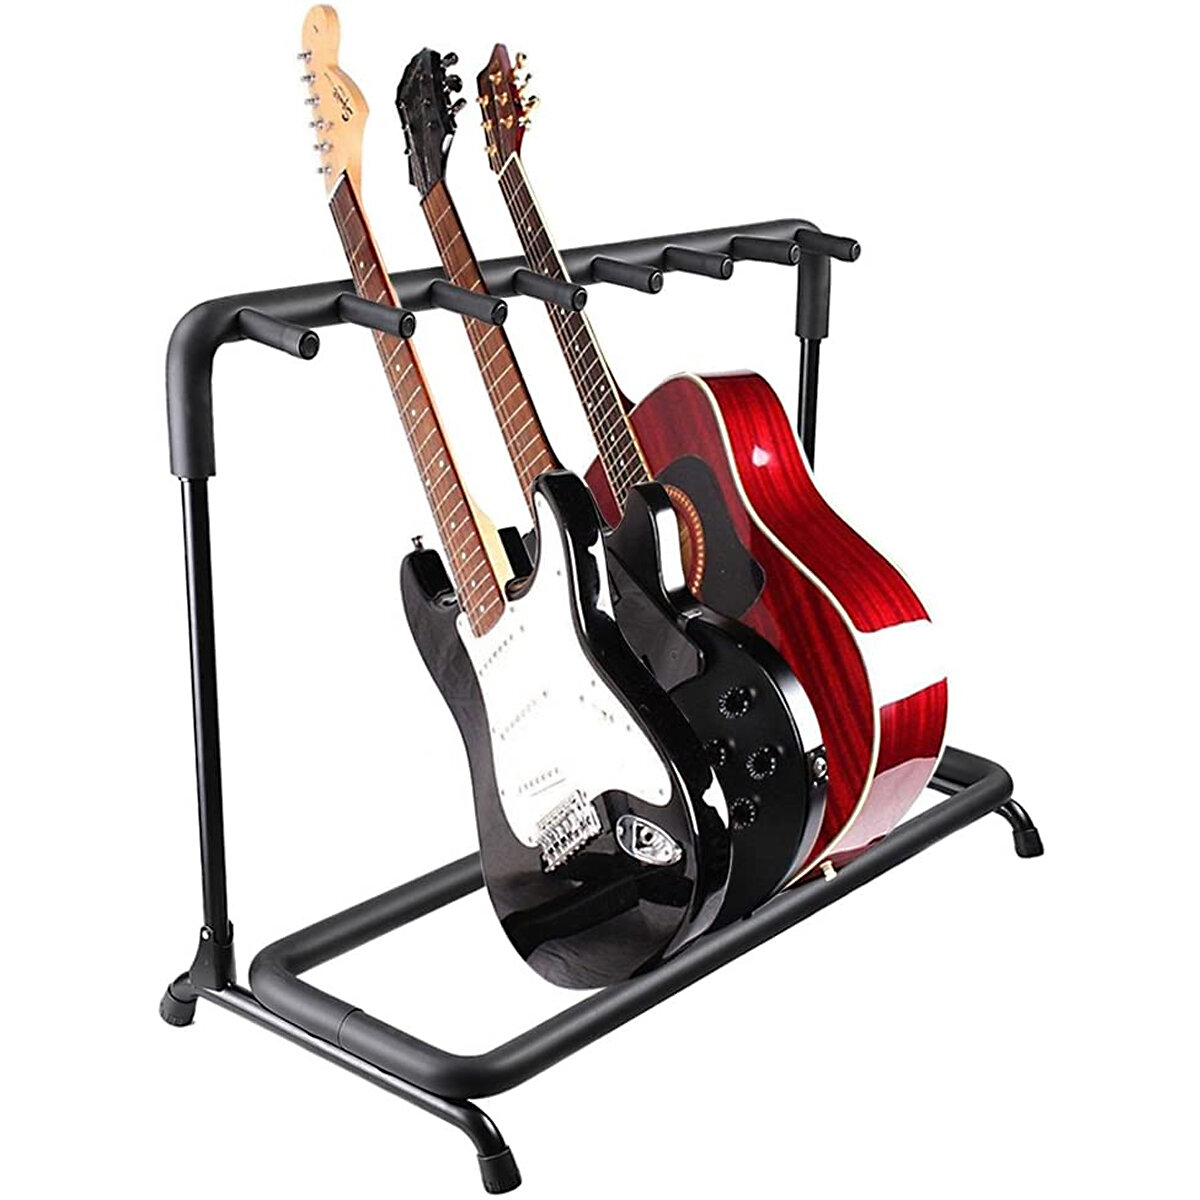 Multi Guitar Stand 7 Holder Foldable Universal Display Rack - Portable Black Guitar Holder for Classical Acoustic, Elect